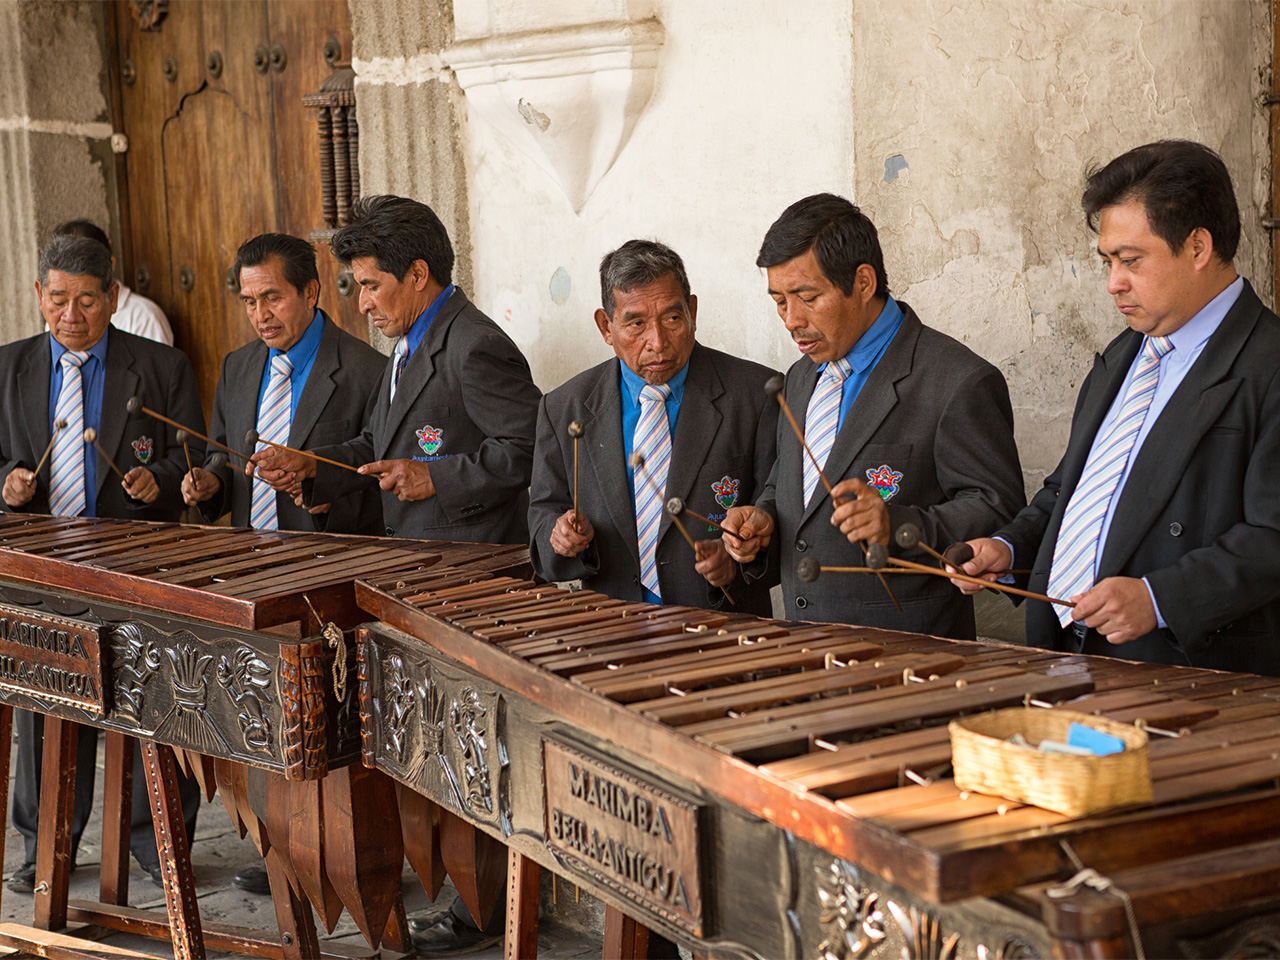 A row of musicians in suit and tie play marimba in front of a colonial style building in Antigua, Guatemala.